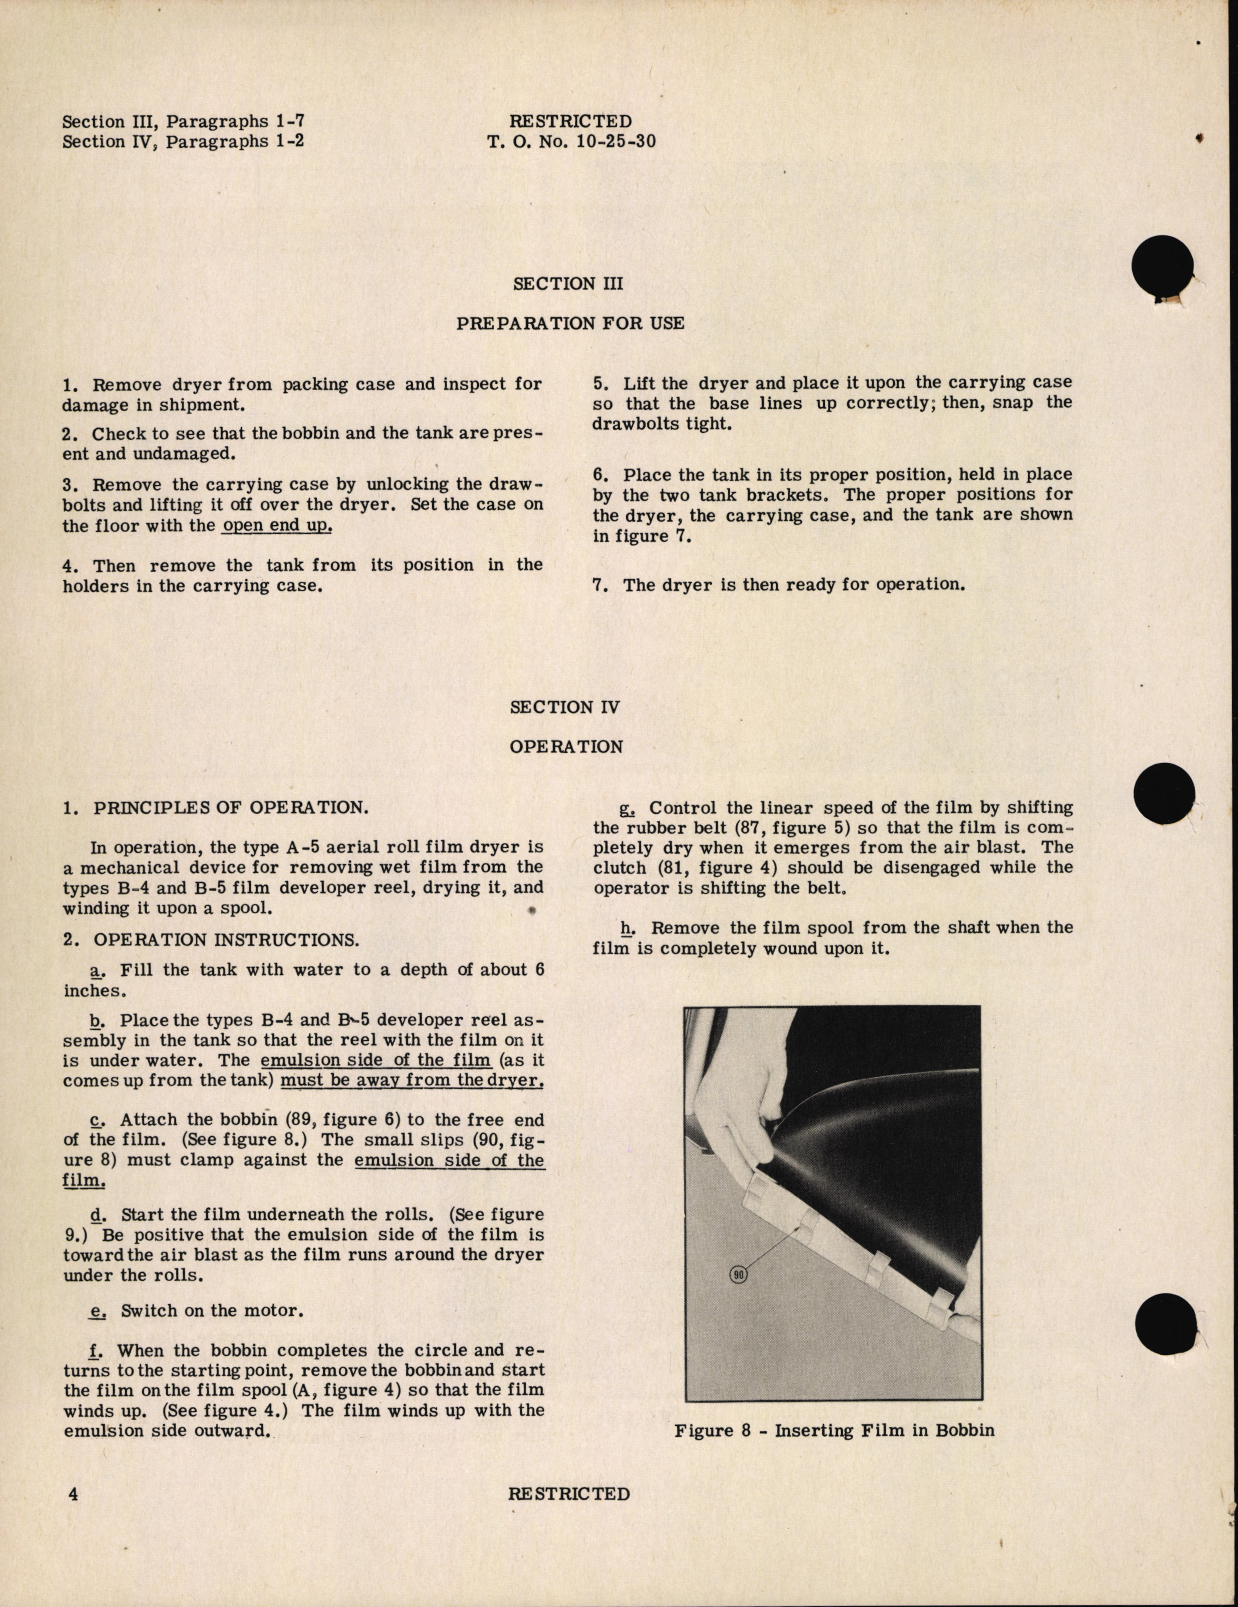 Sample page 8 from AirCorps Library document: Handbook of Instructions with Parts Catalog for Type A-5 Aerial Roll Film Dryer